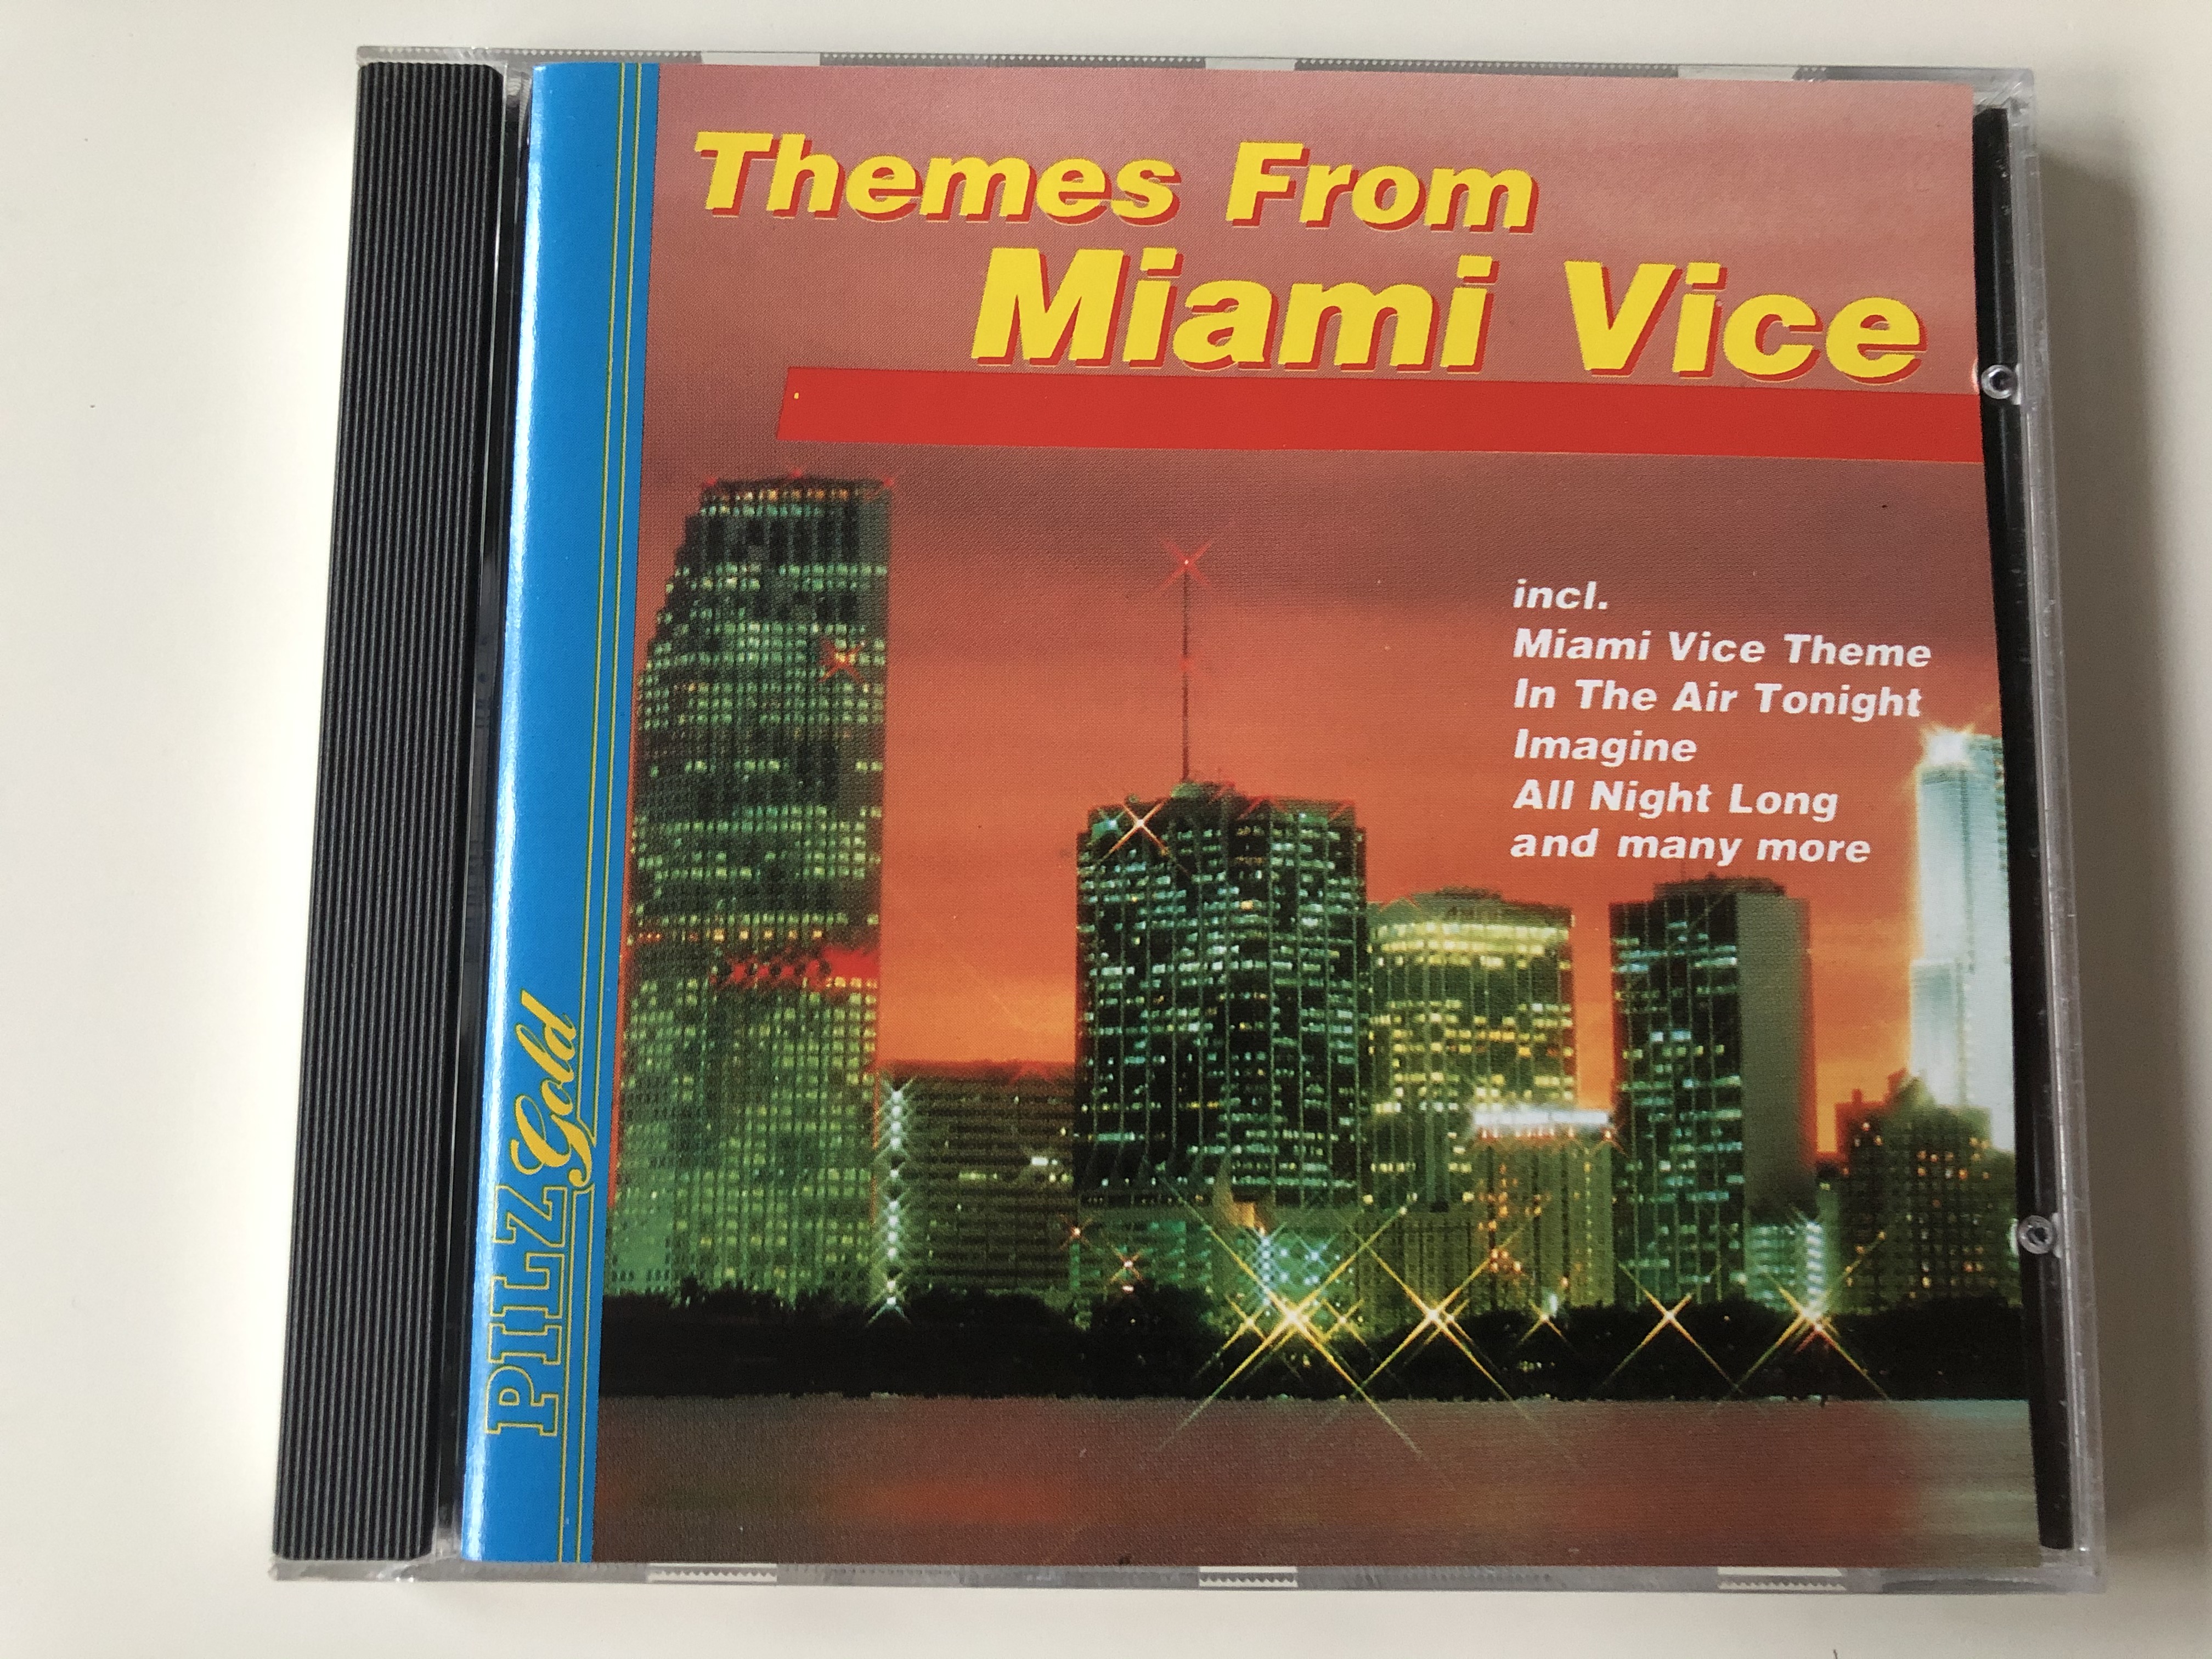 themes-from-miami-vice-incl.-miami-vice-theme-in-the-air-tonight-imagine-all-night-long-and-many-more-pilz-gold-audio-cd-stereo-75209-1-.jpg